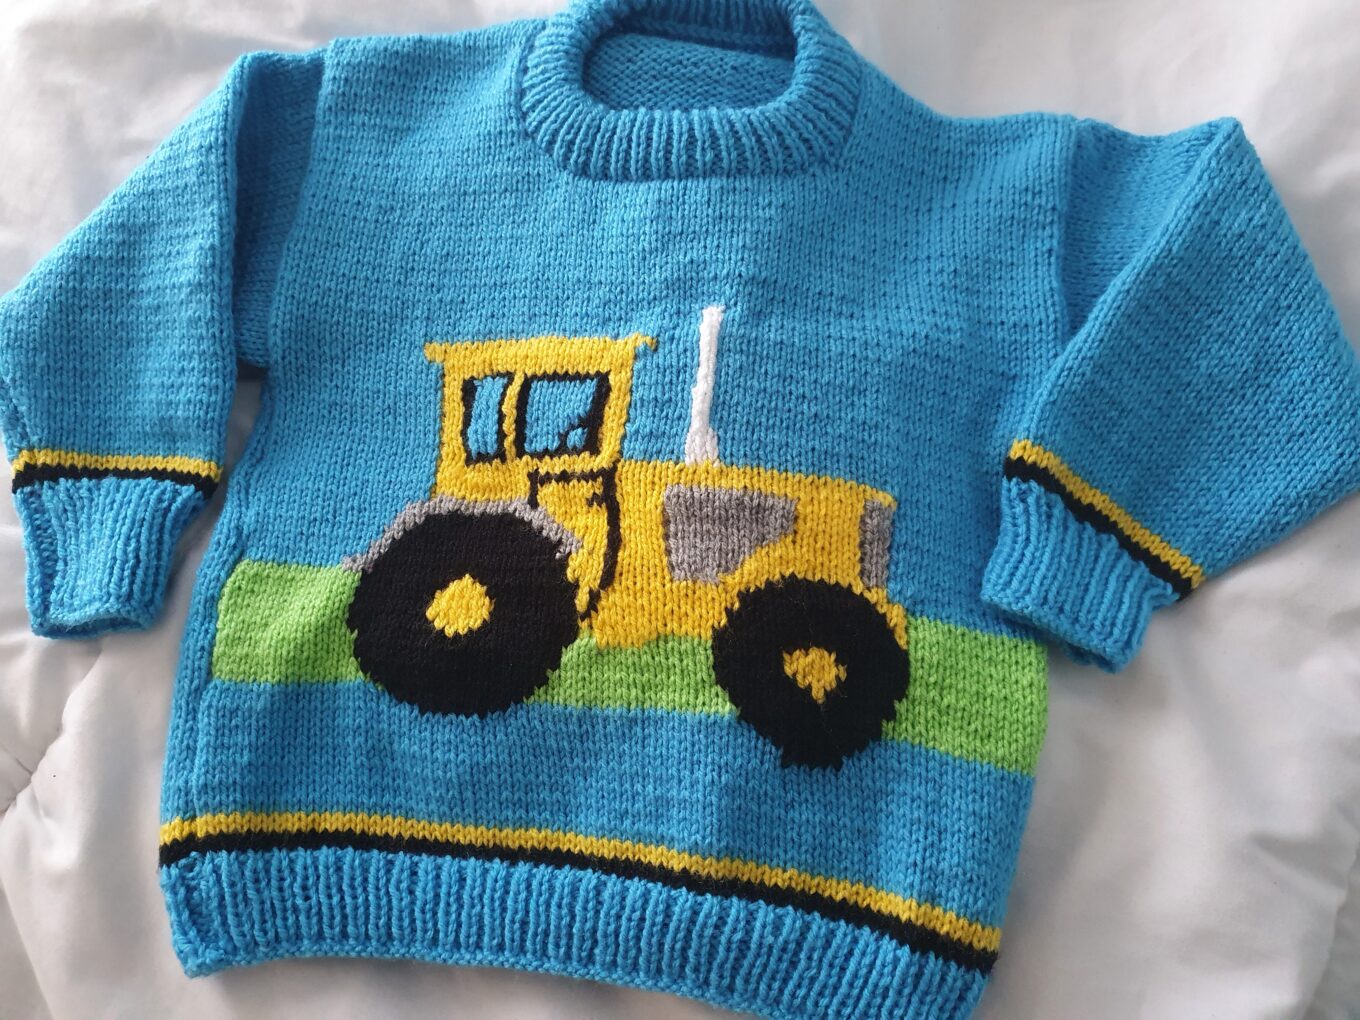 Carol's blue knitted jumper with yellow tractor on the front